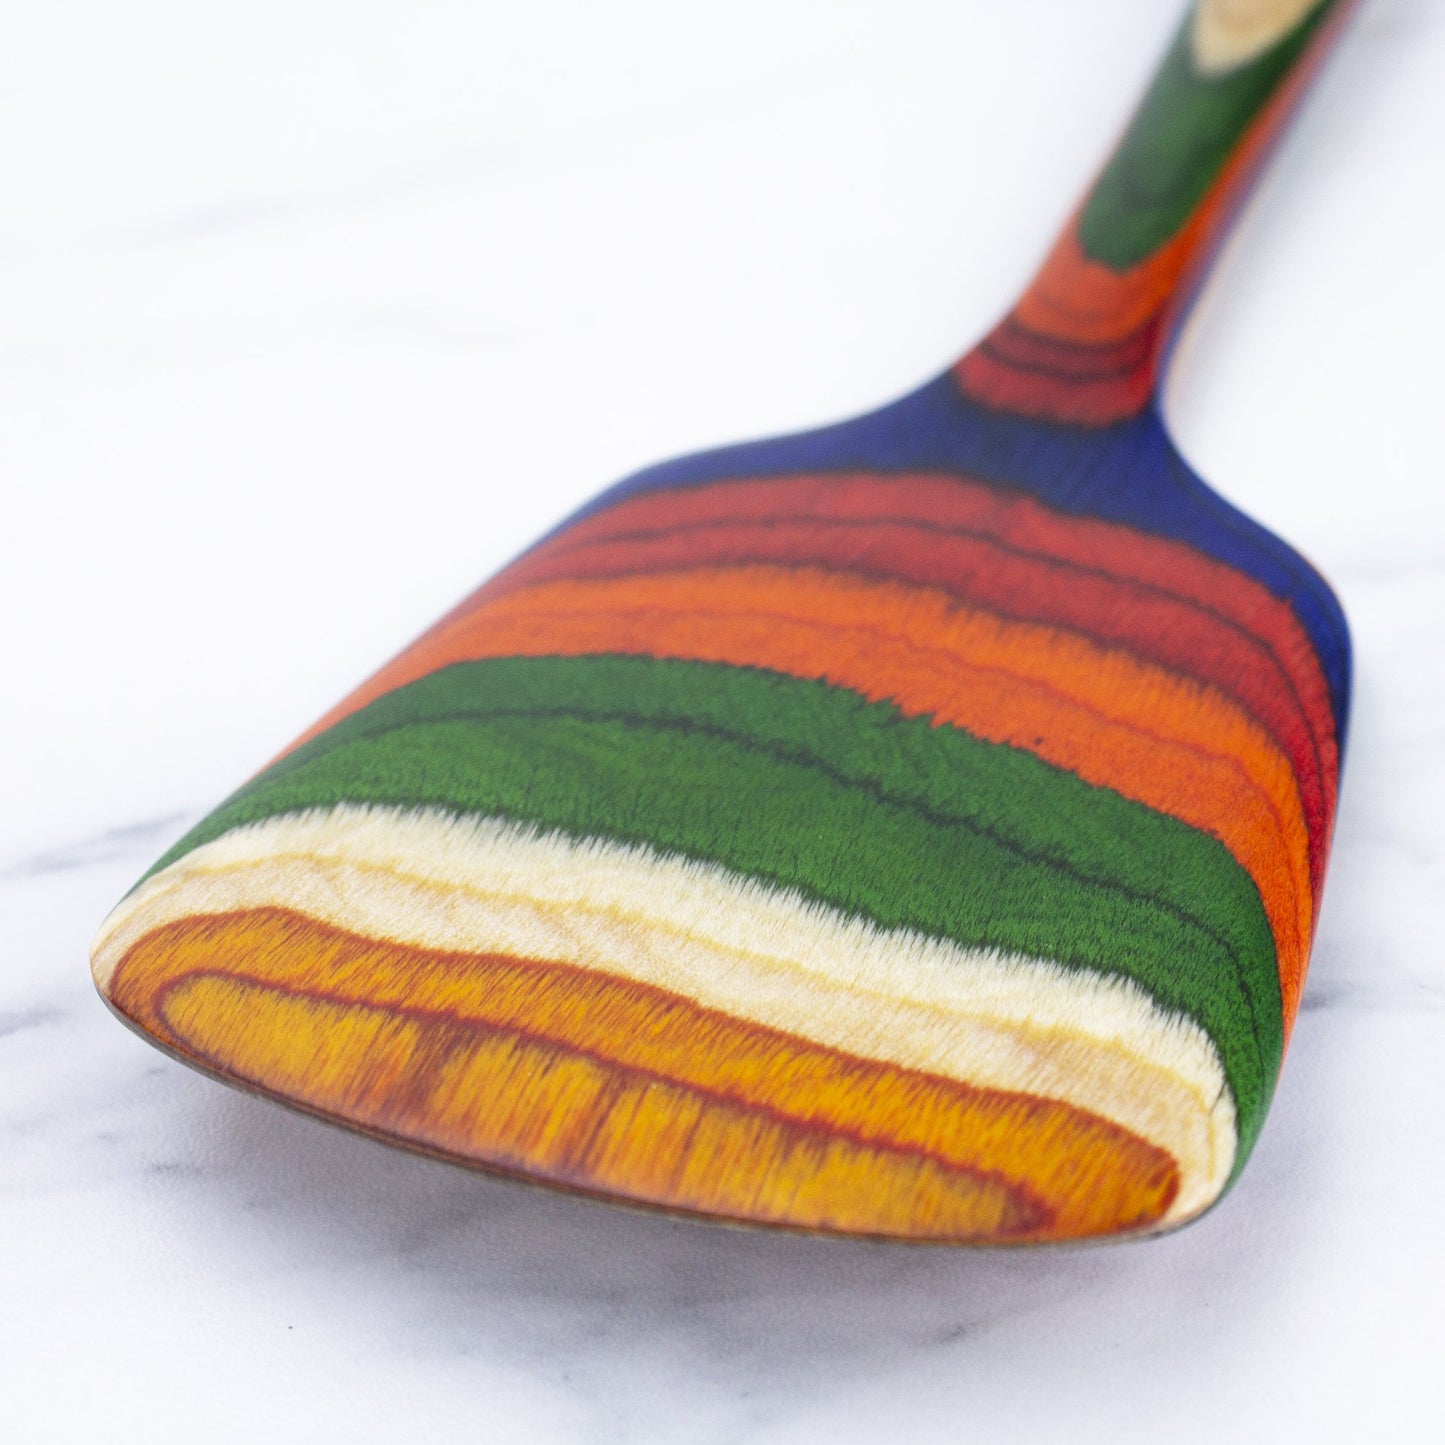 close-up view of spatula on white background.